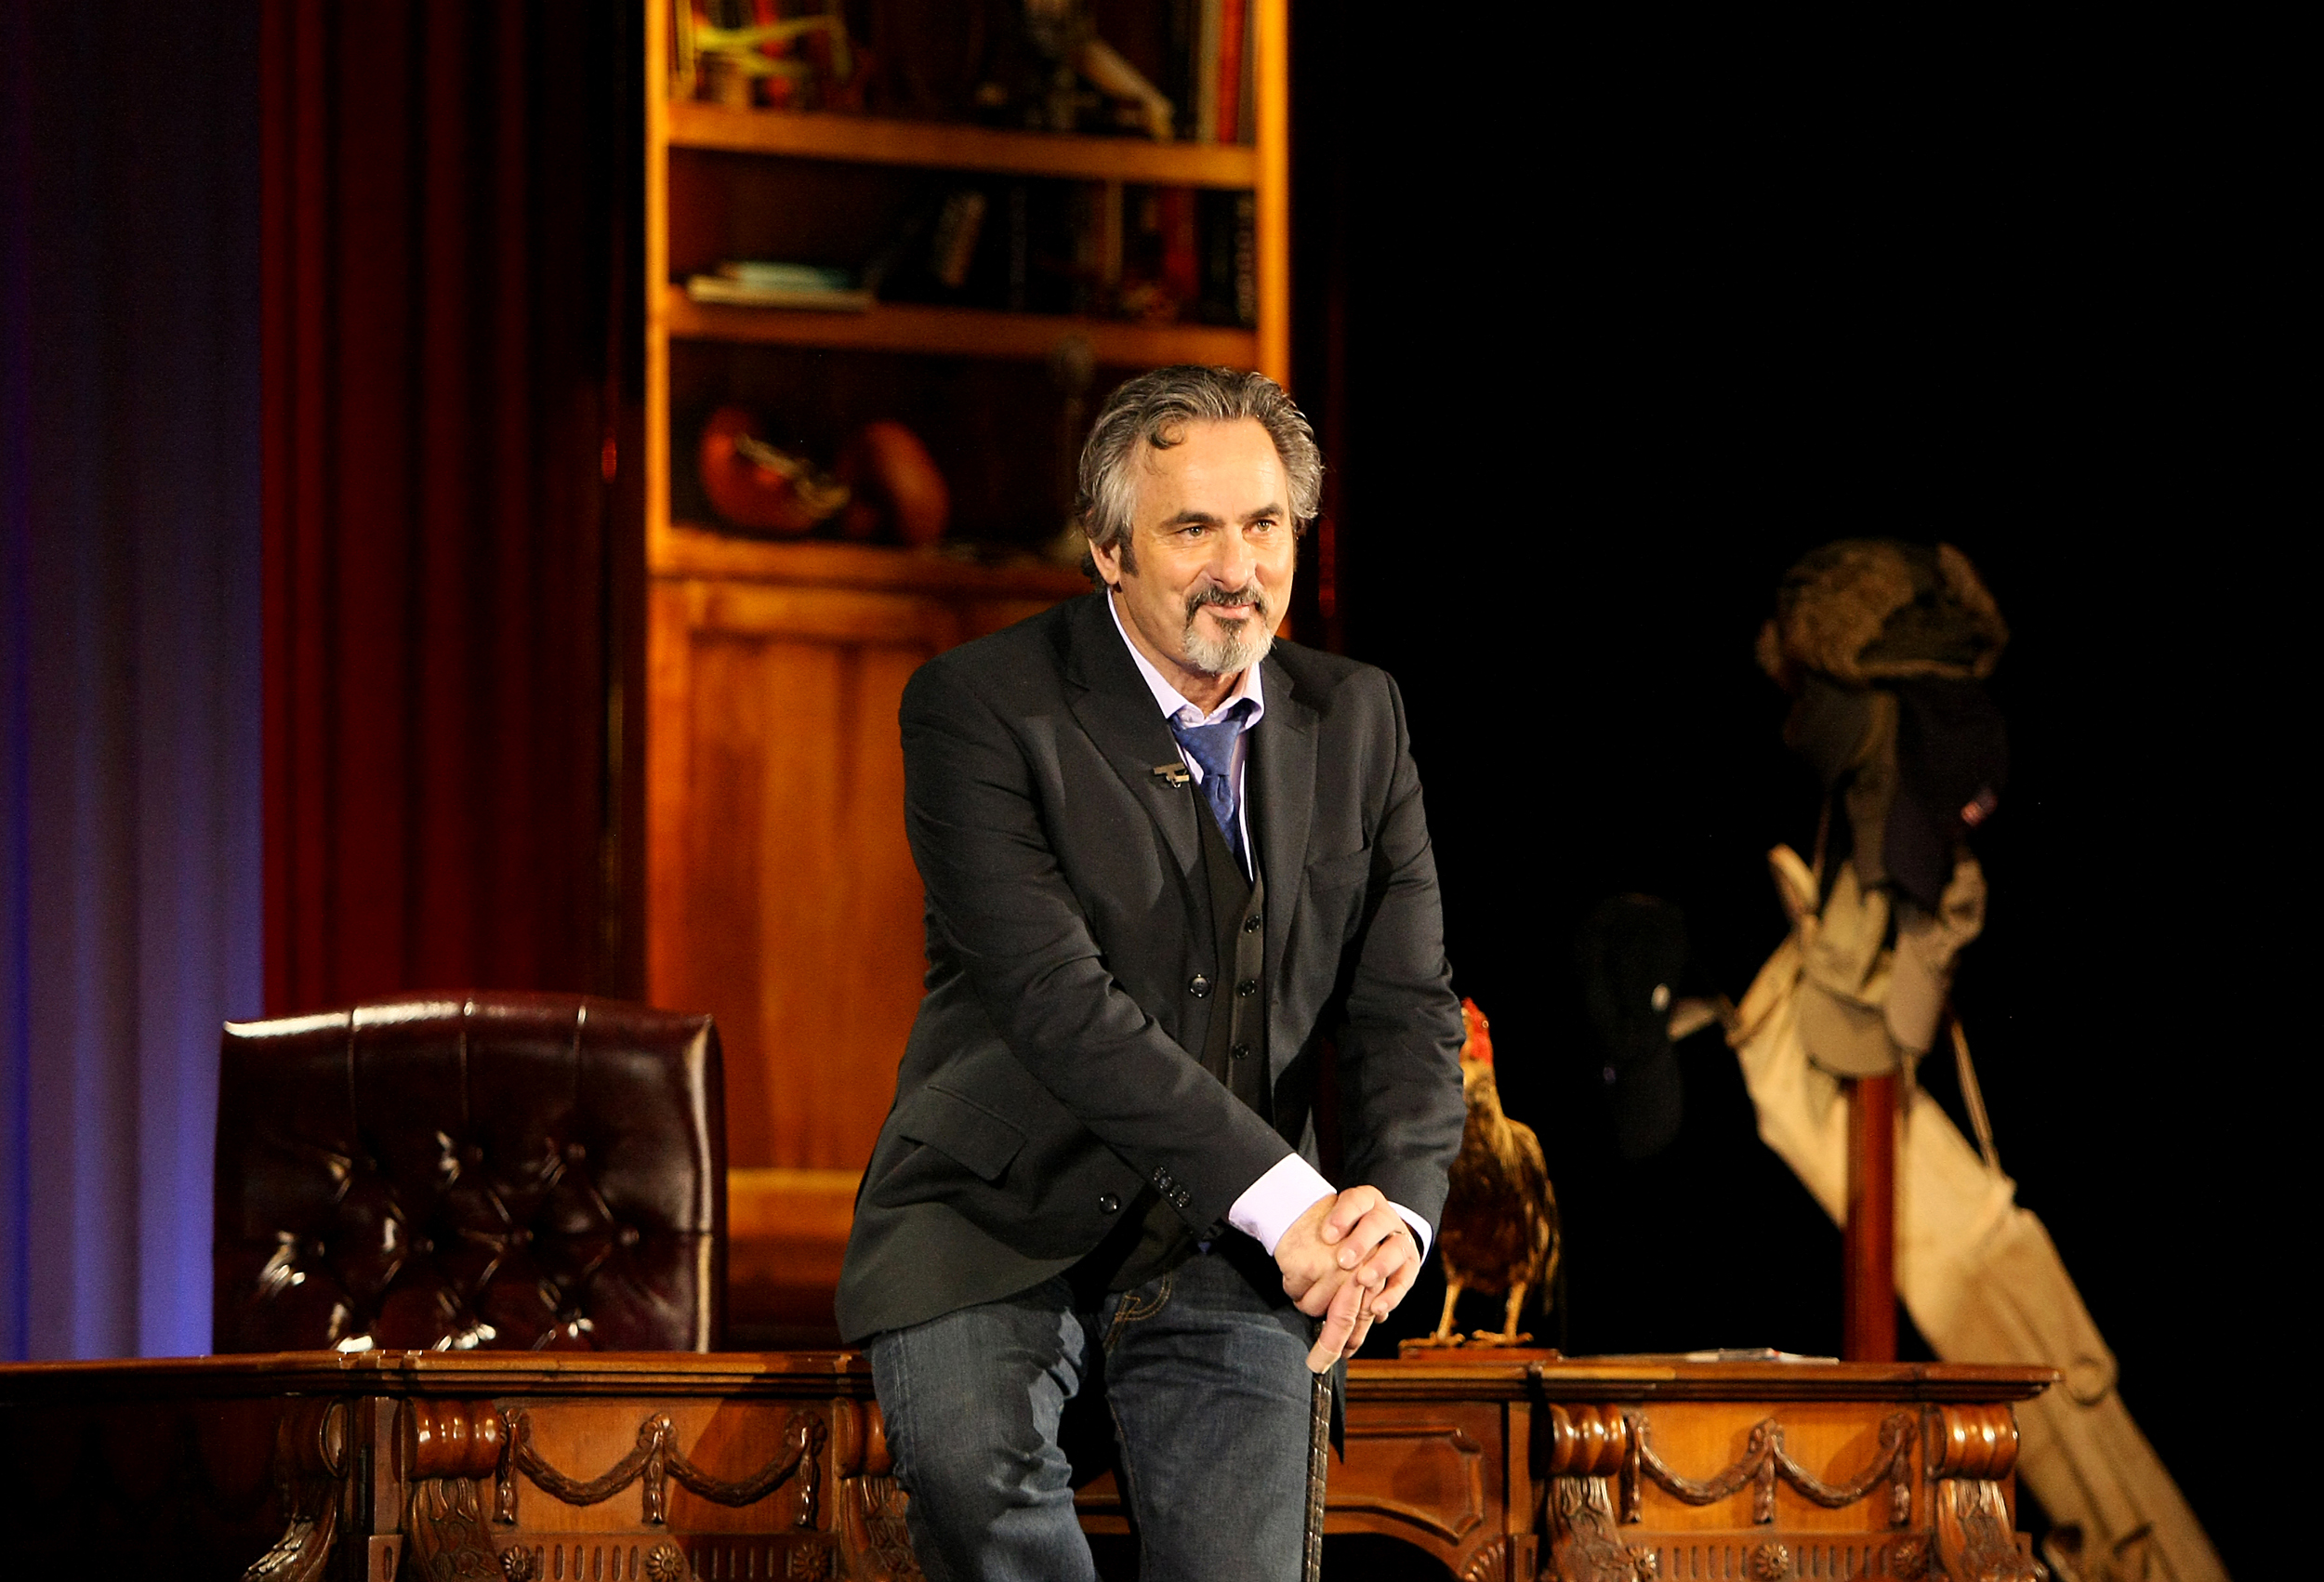 David Feherty at Universal's Sound Stage 20 running through a dress rehearsal for his upcoming live shows.